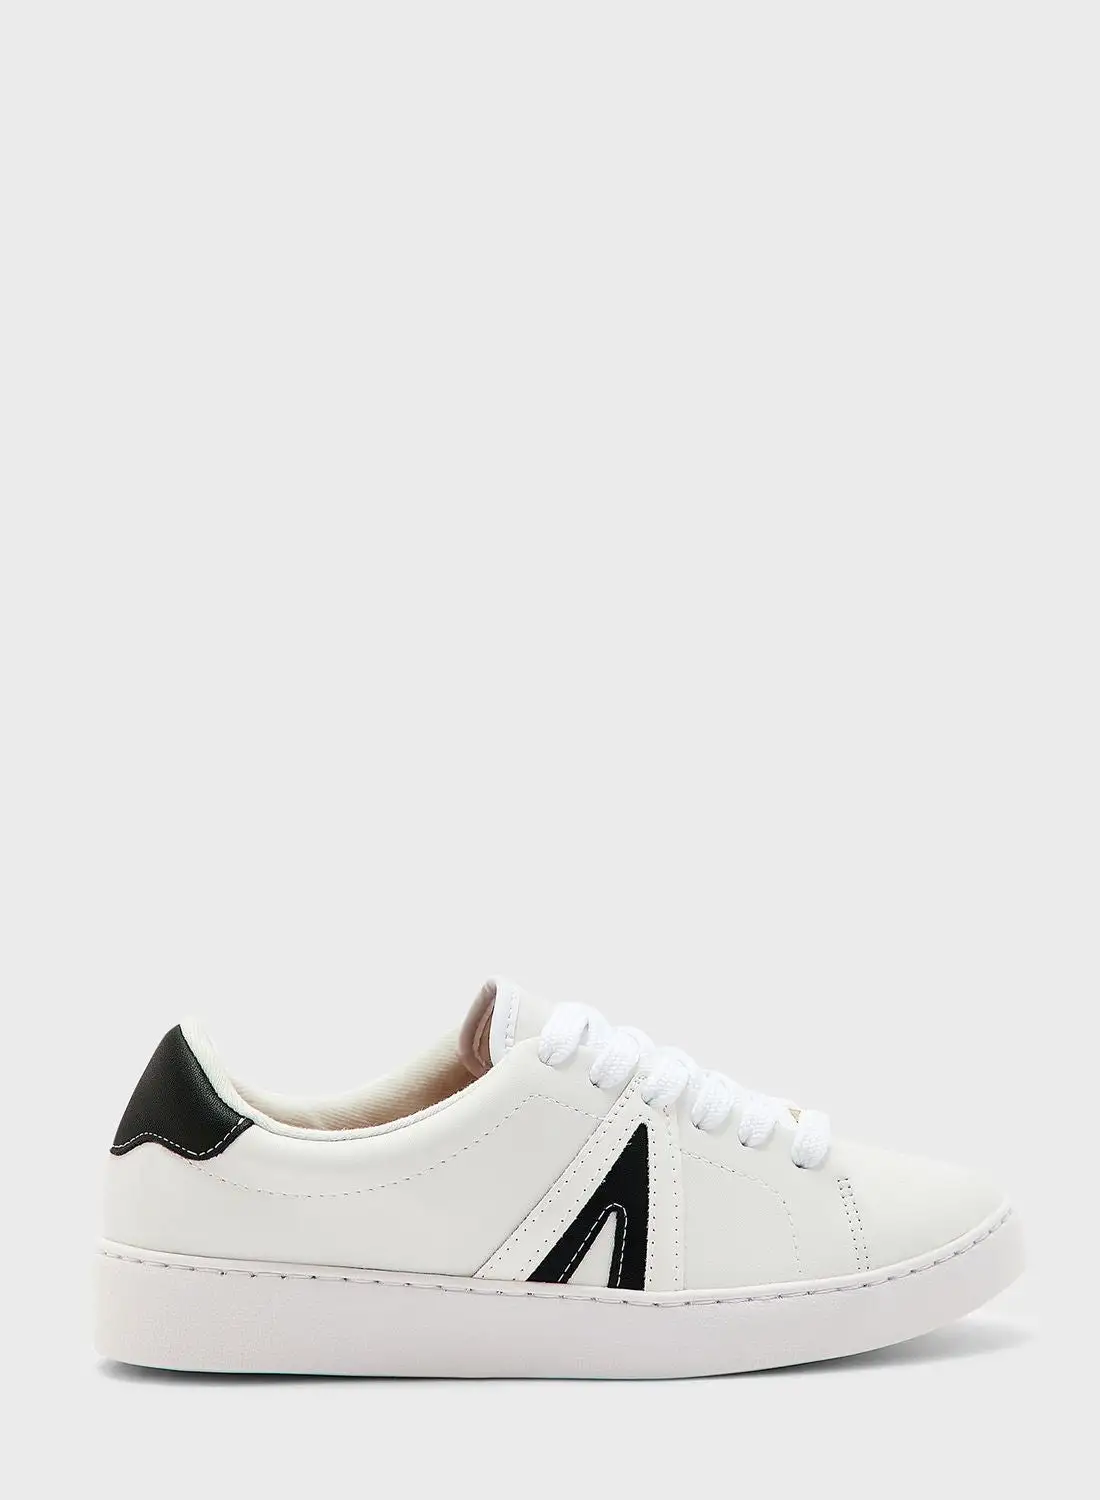 VIZZANO Lace Up Low Top Sneakers